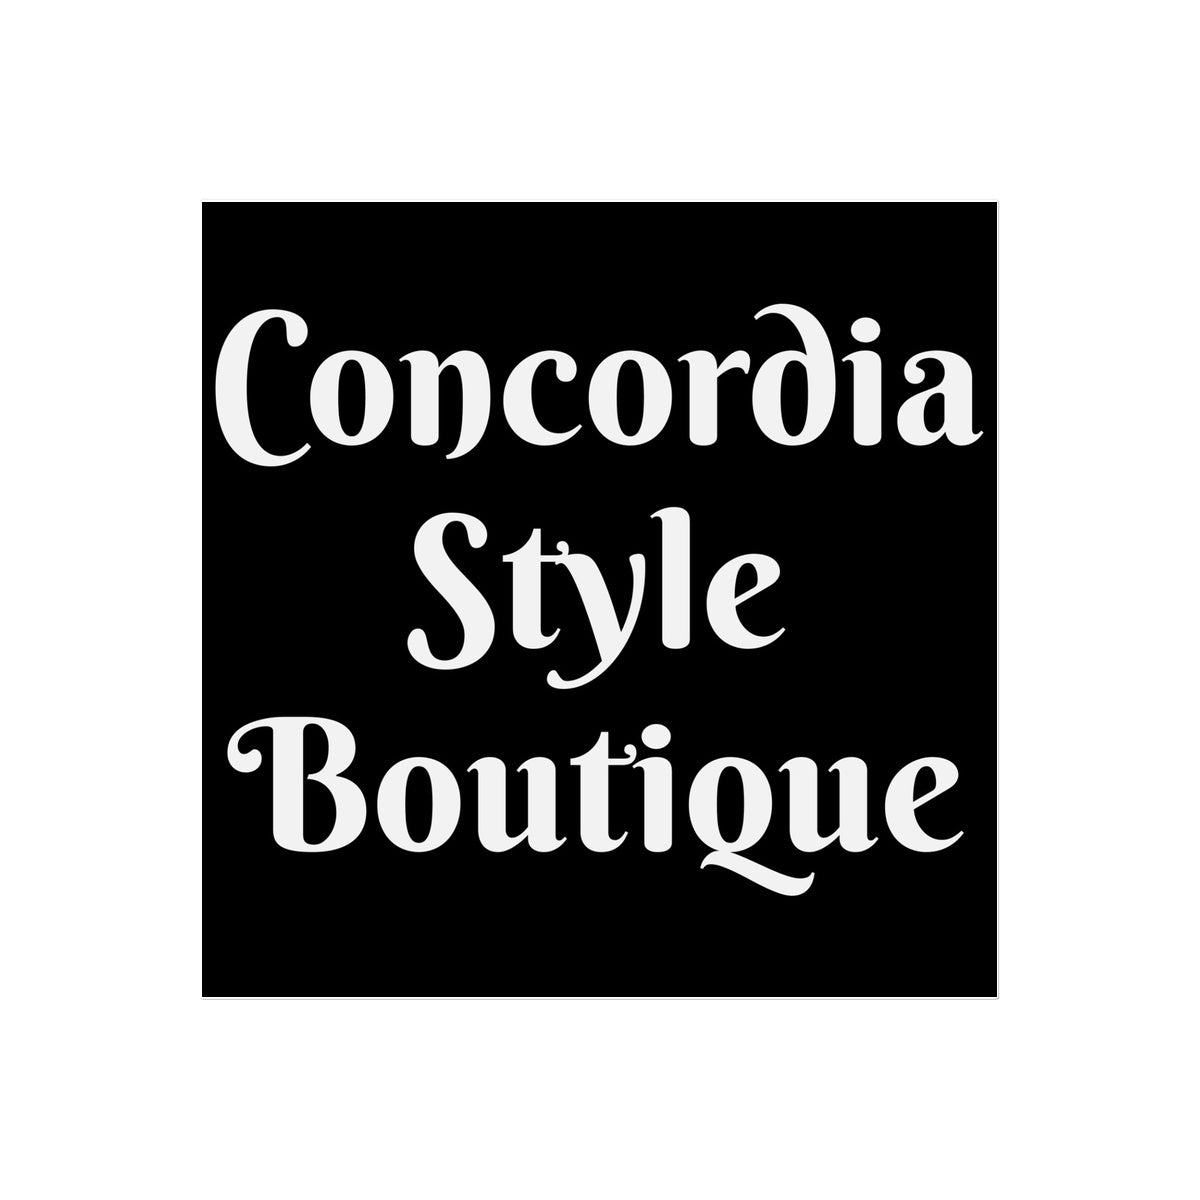 Concordia Style Boutique Temporary Tattoo - Premium Tattoos from Prodigi - Just $4.16! Shop now at Concordia Style Boutique